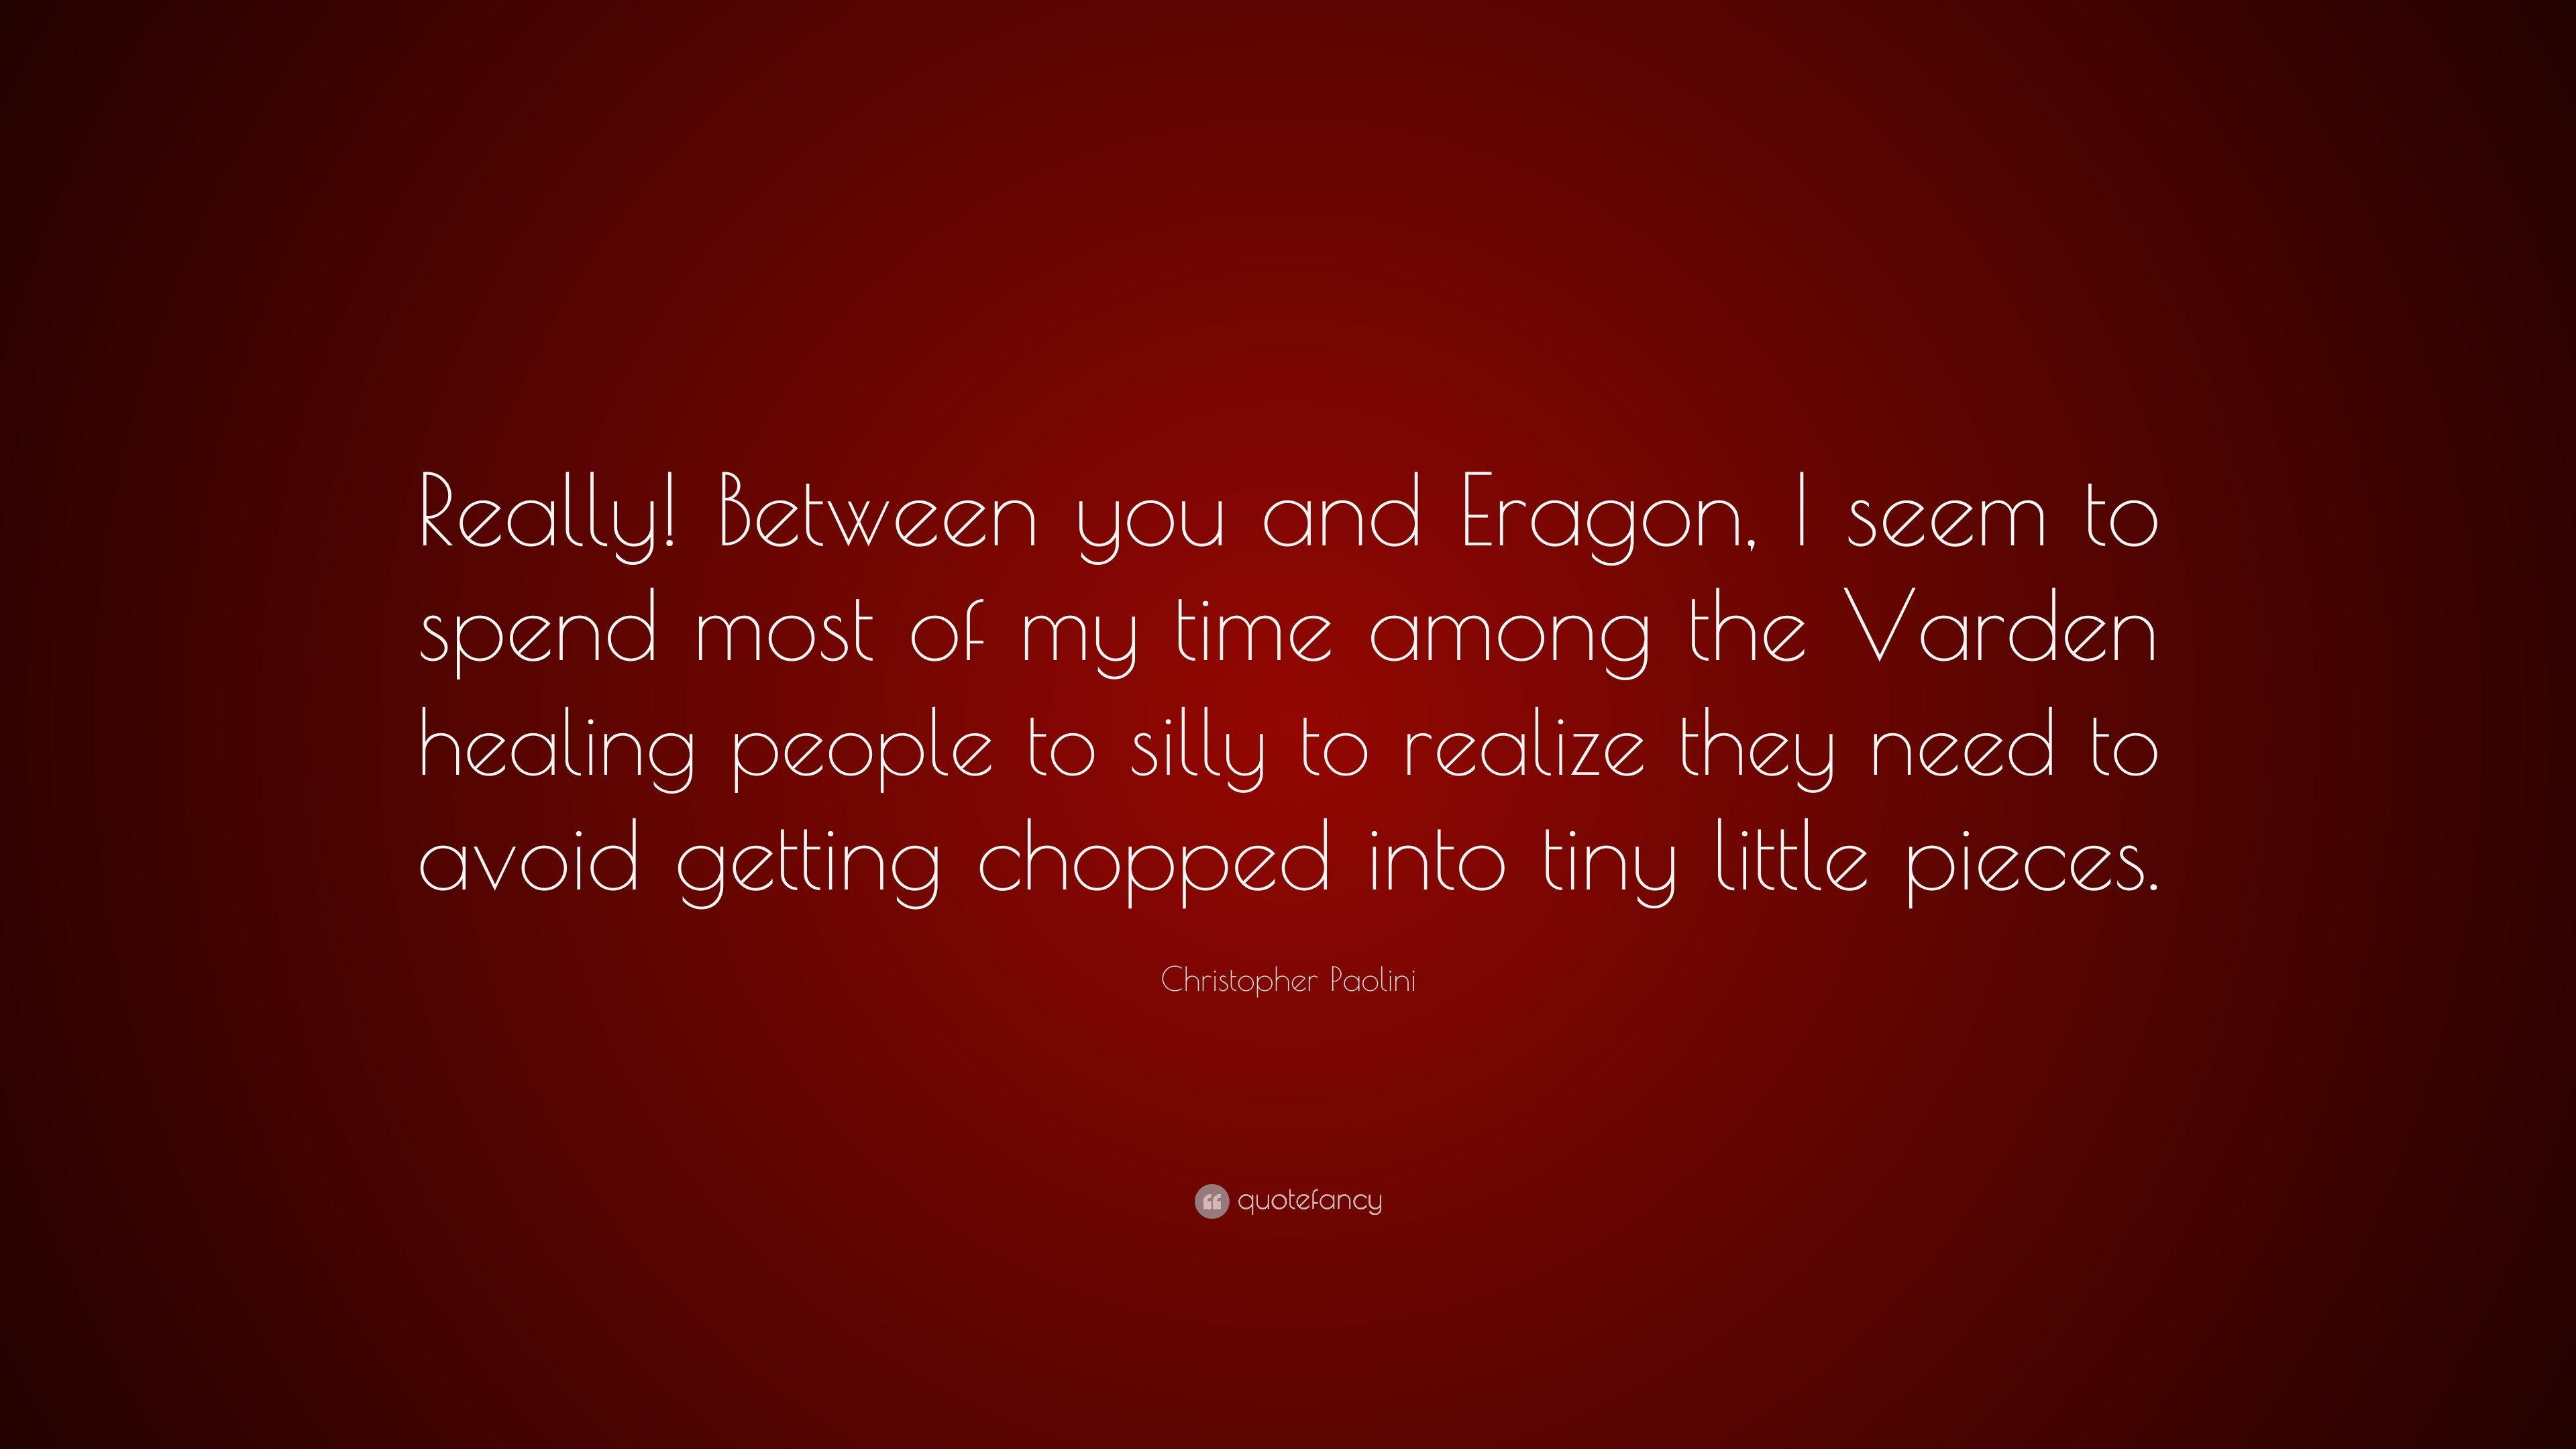 3840x2160 Christopher Paolini Quote: “Really! Between you and Eragon, I seem to spend